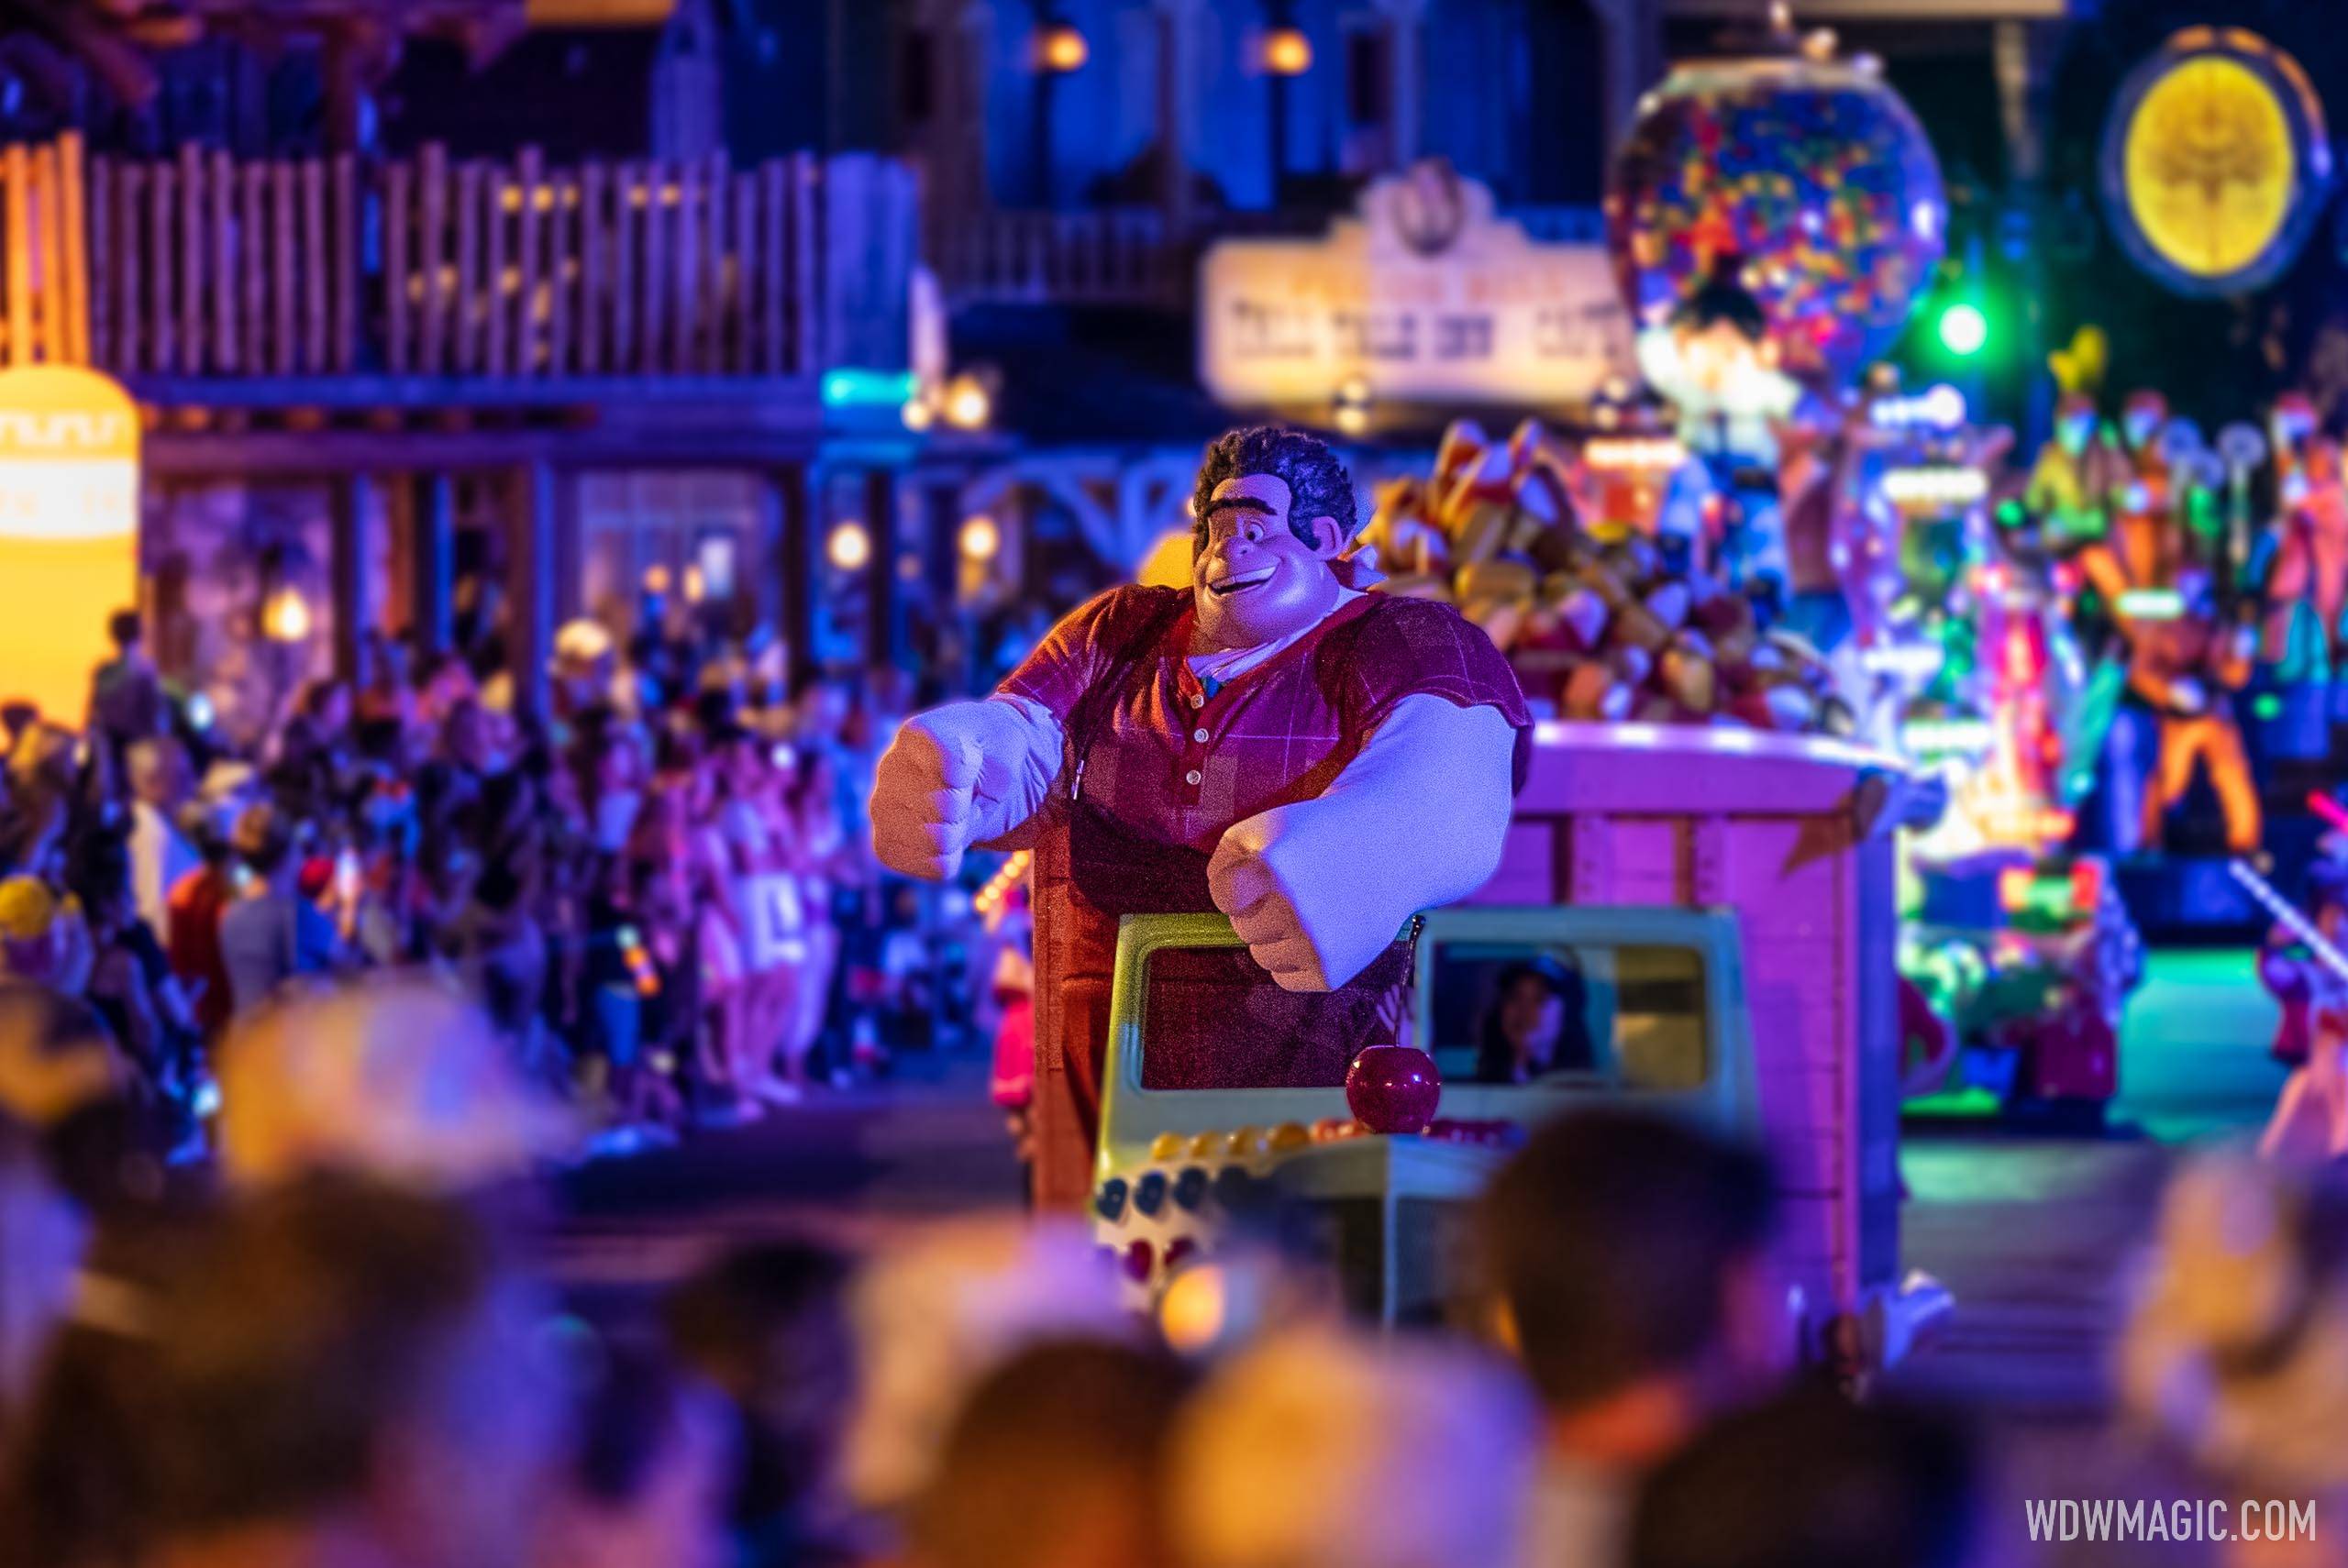 Mickey's Boo-To-You Halloween Parade - Wreck It Ralph